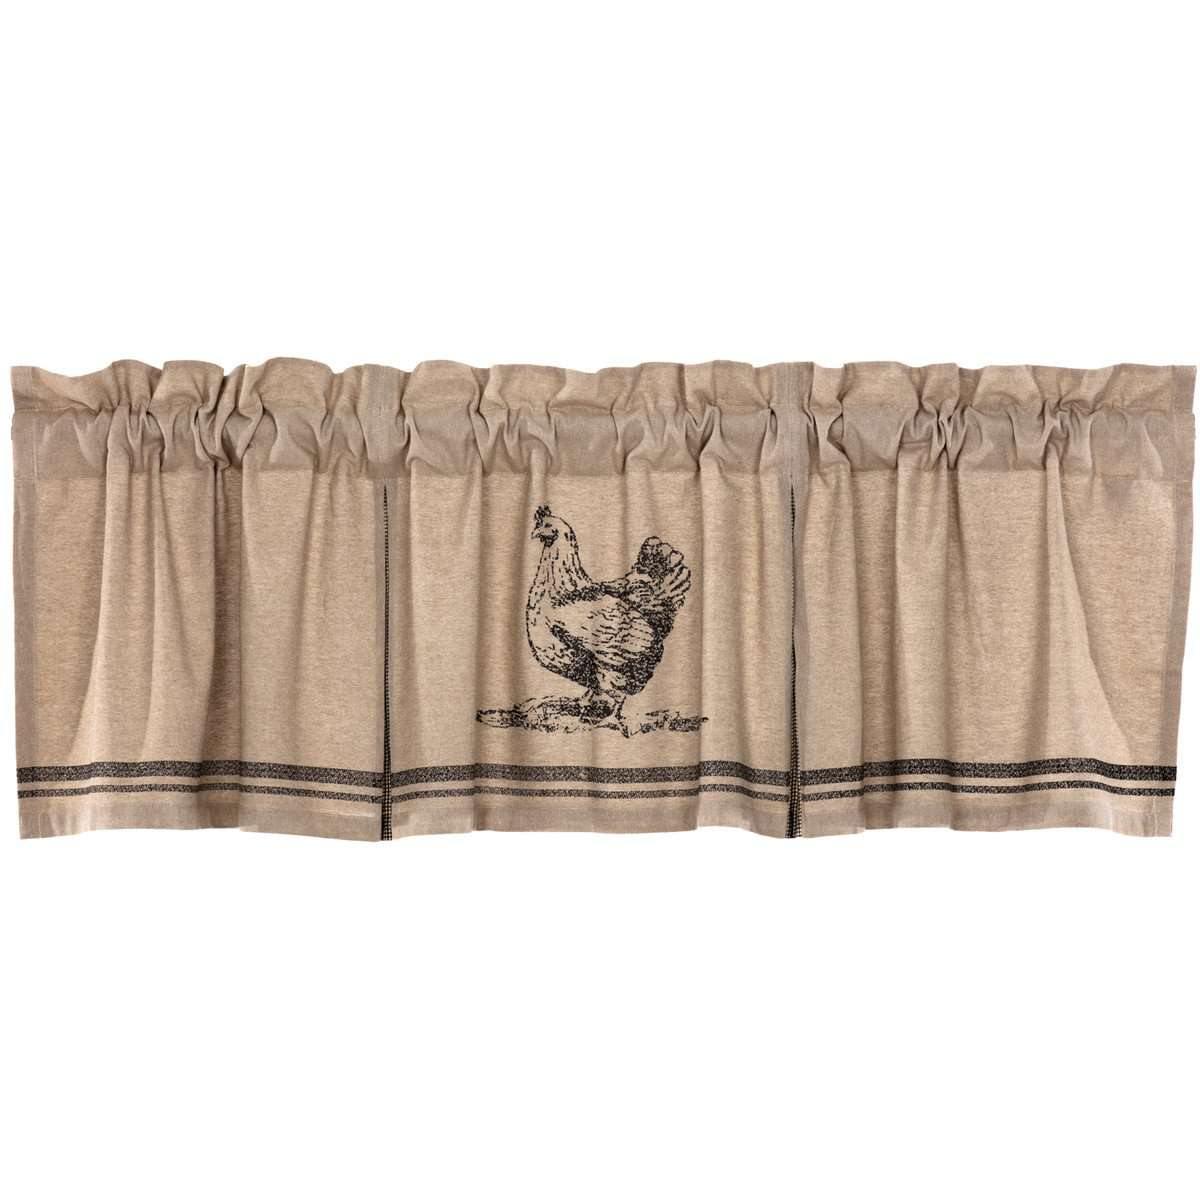 Sawyer Mill Charcoal Chicken Valance Pleated Curtain 20x72 VHC Brands - The Fox Decor